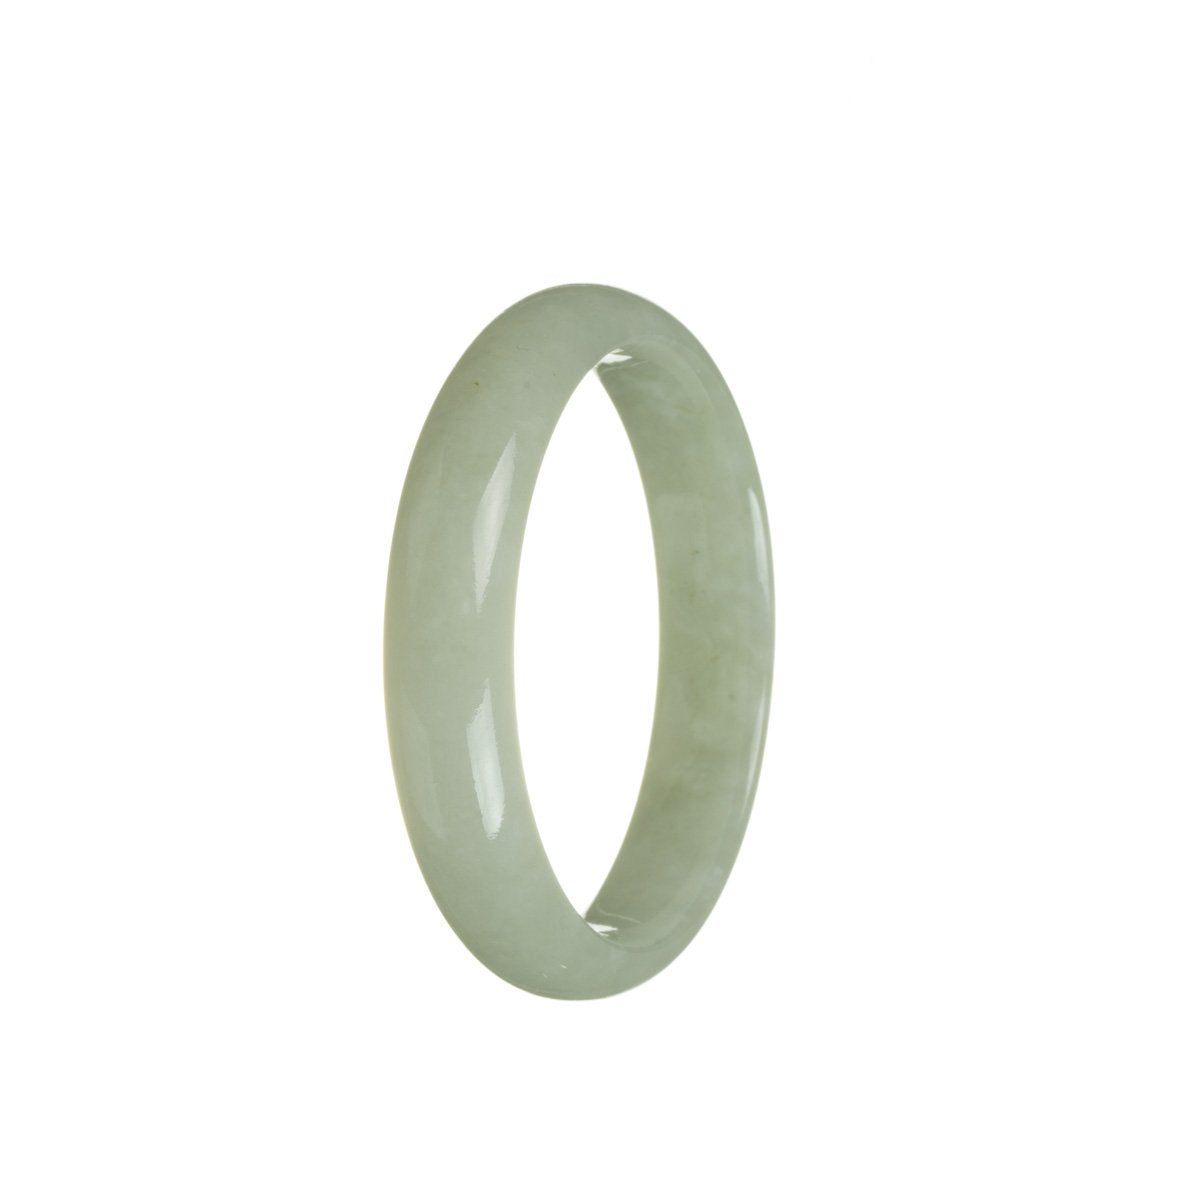 A pale green traditional jade bangle bracelet with a half moon shape, measuring 55mm.